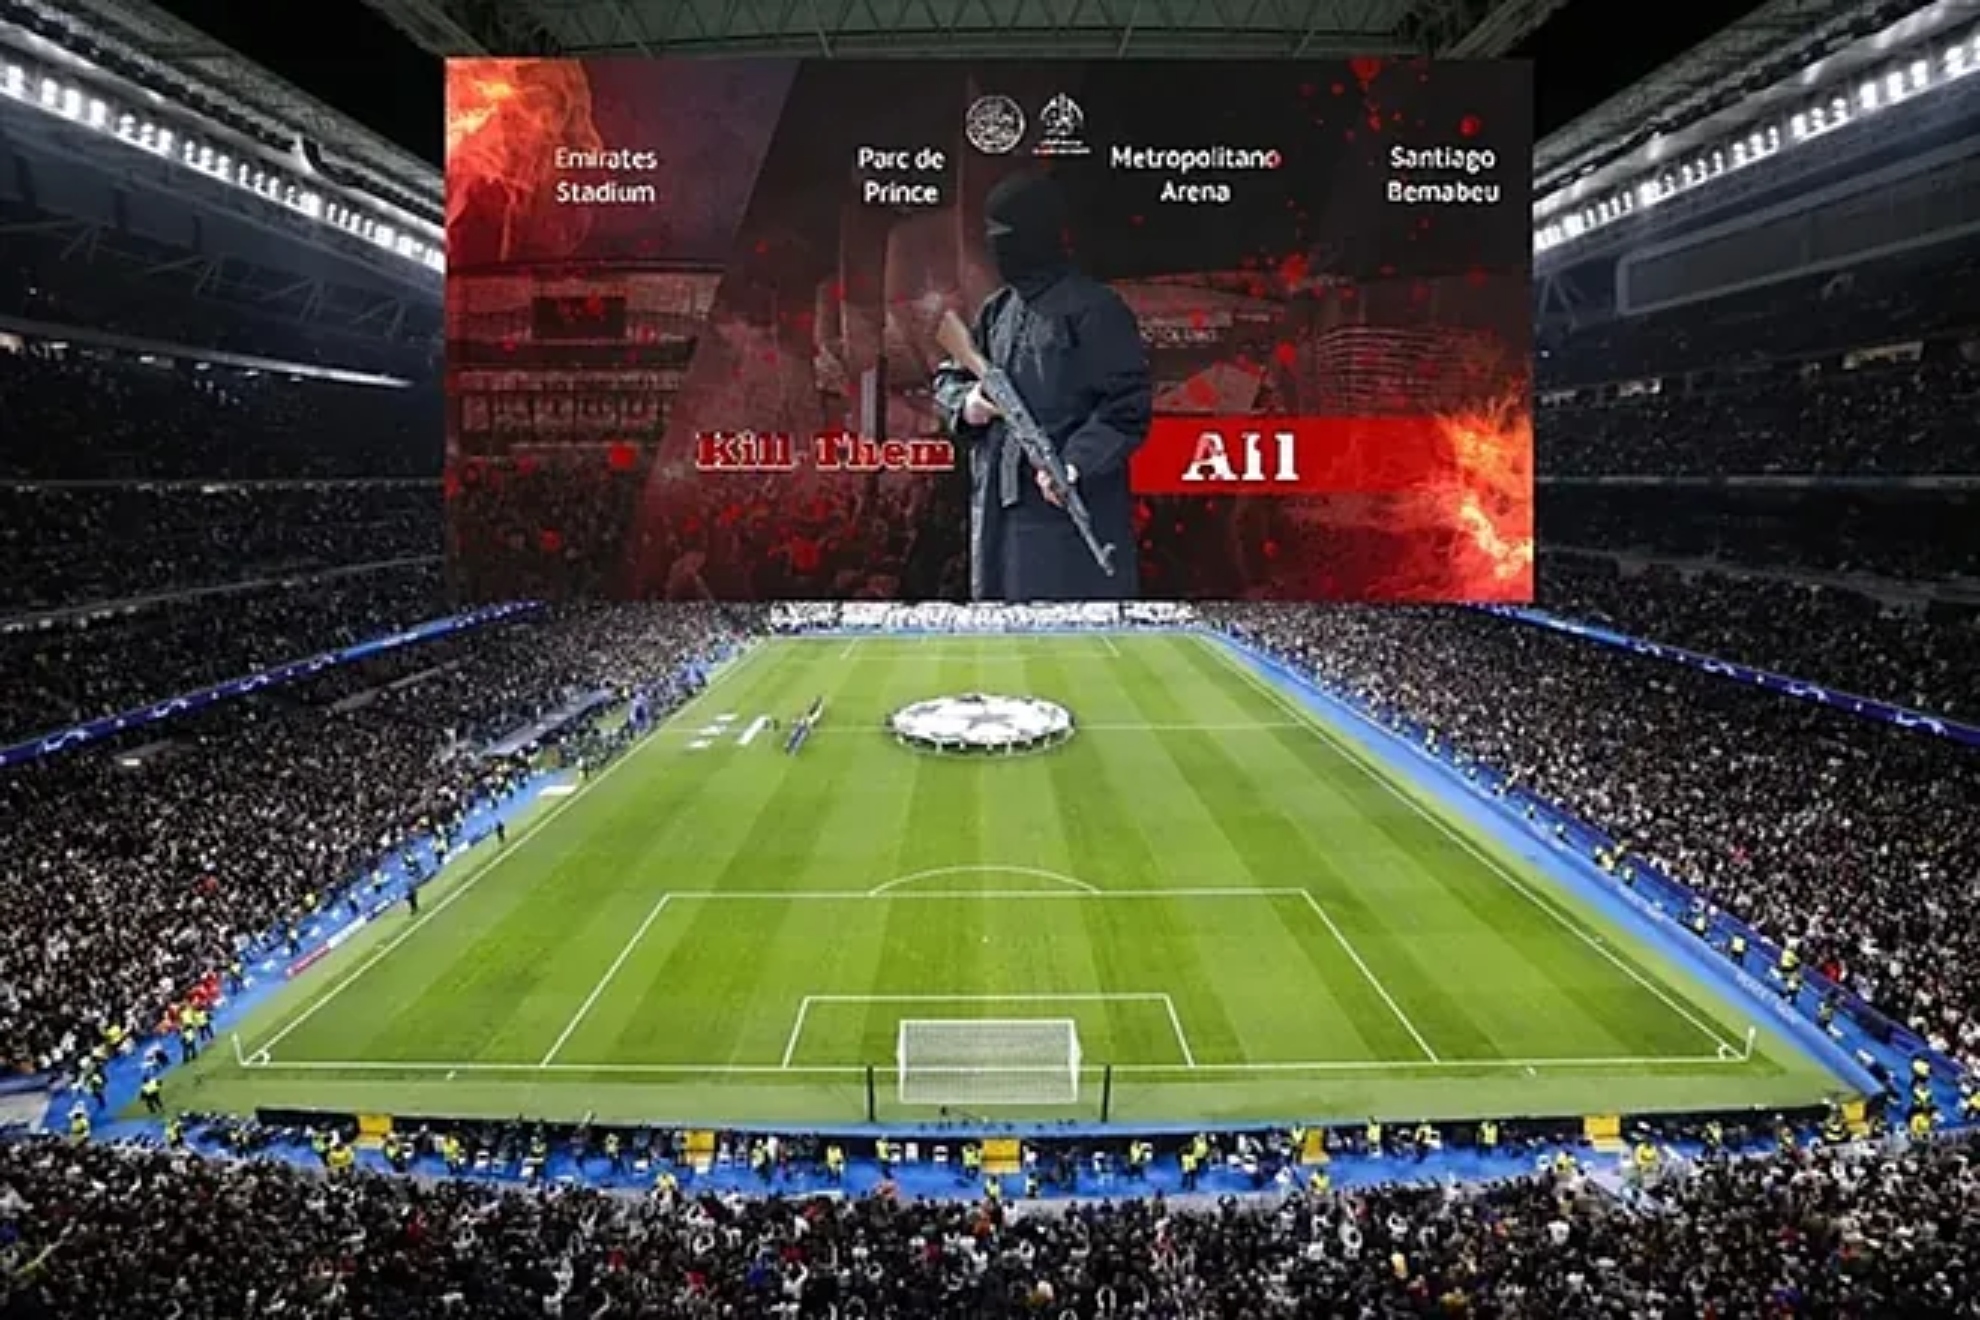 Terrorists threaten Champions League quarterfinals provoking chaos with violent message